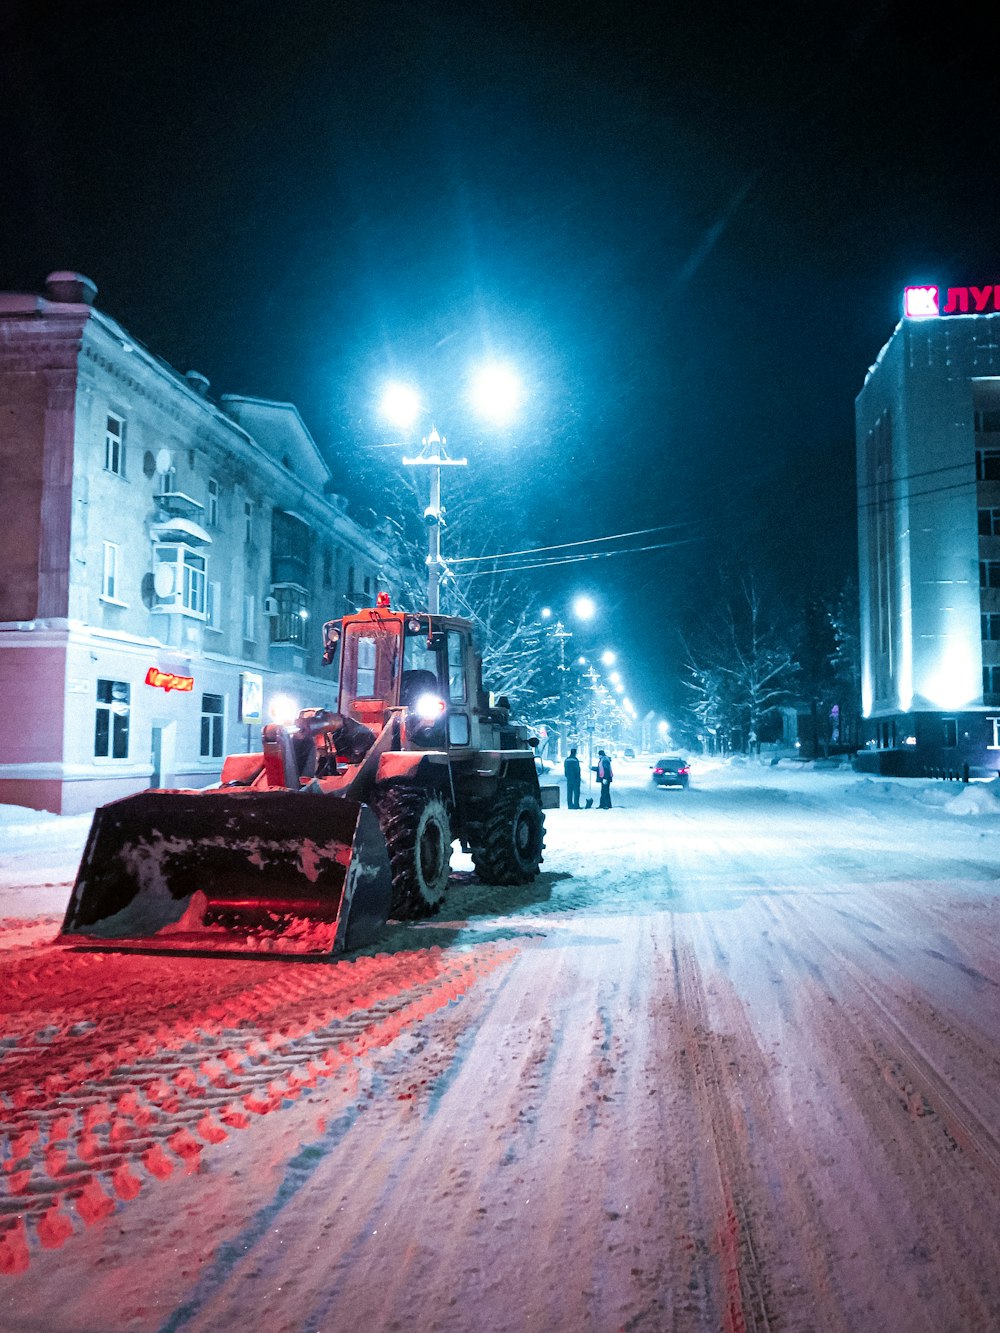 a snow plow on a snowy street at night